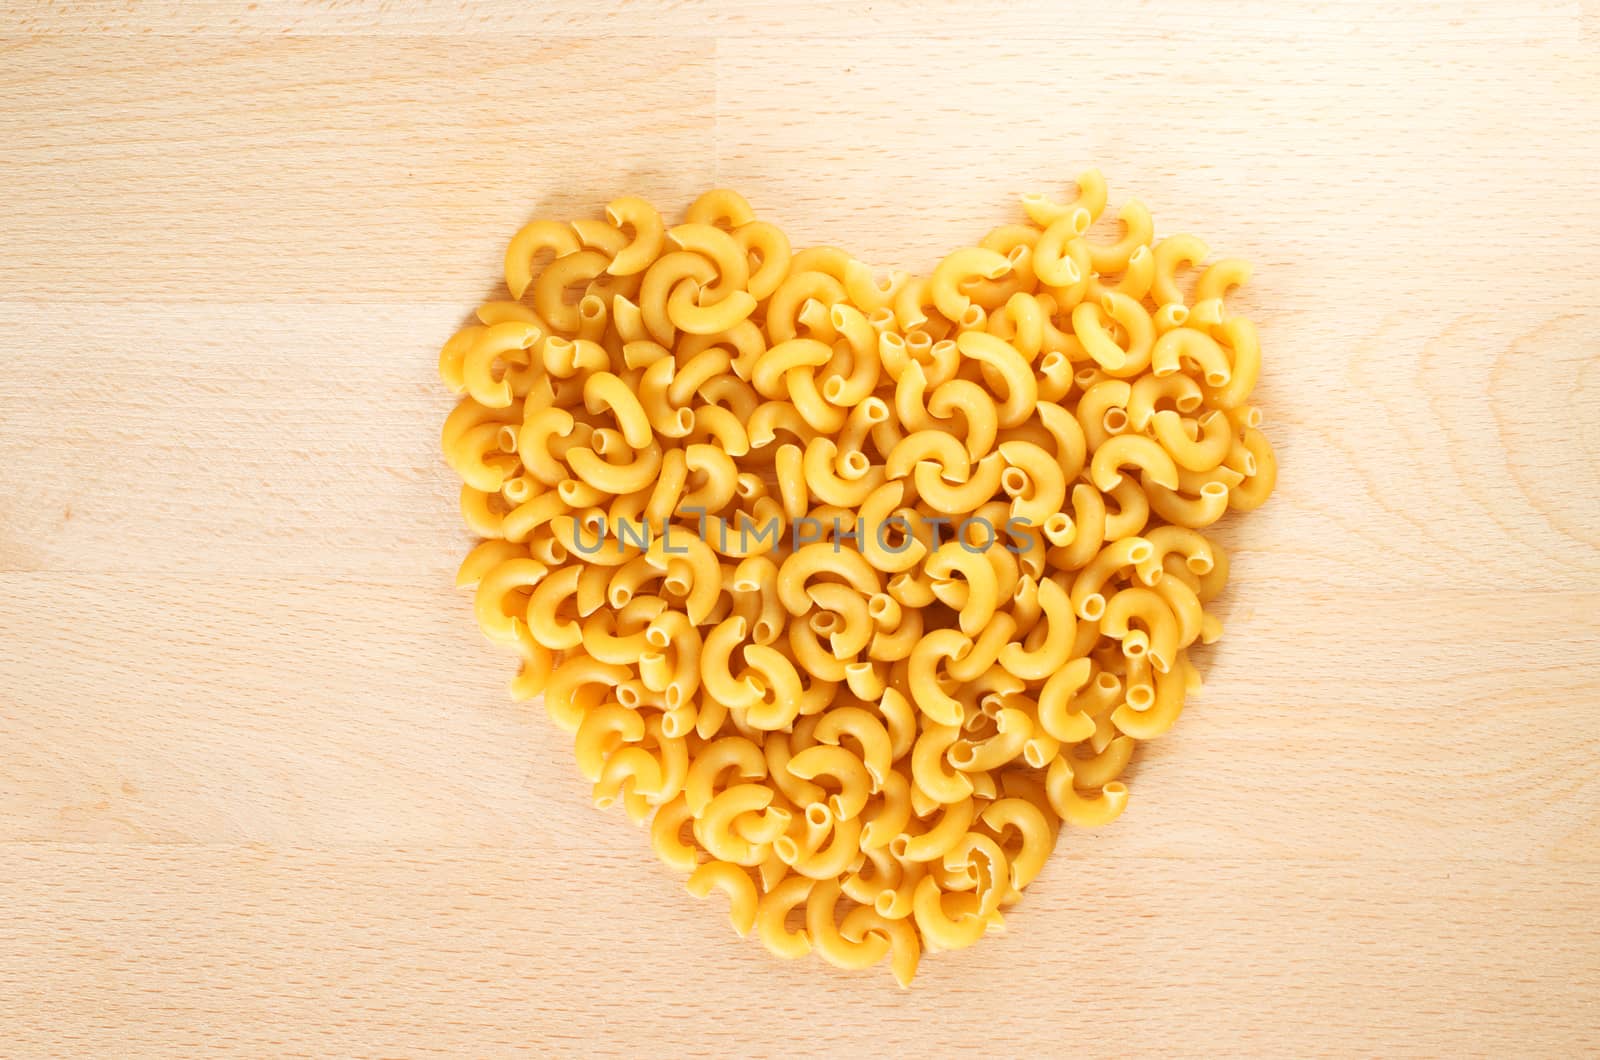 Macaroni forming a heart over a wooden cut board. Concept of healthy food. 